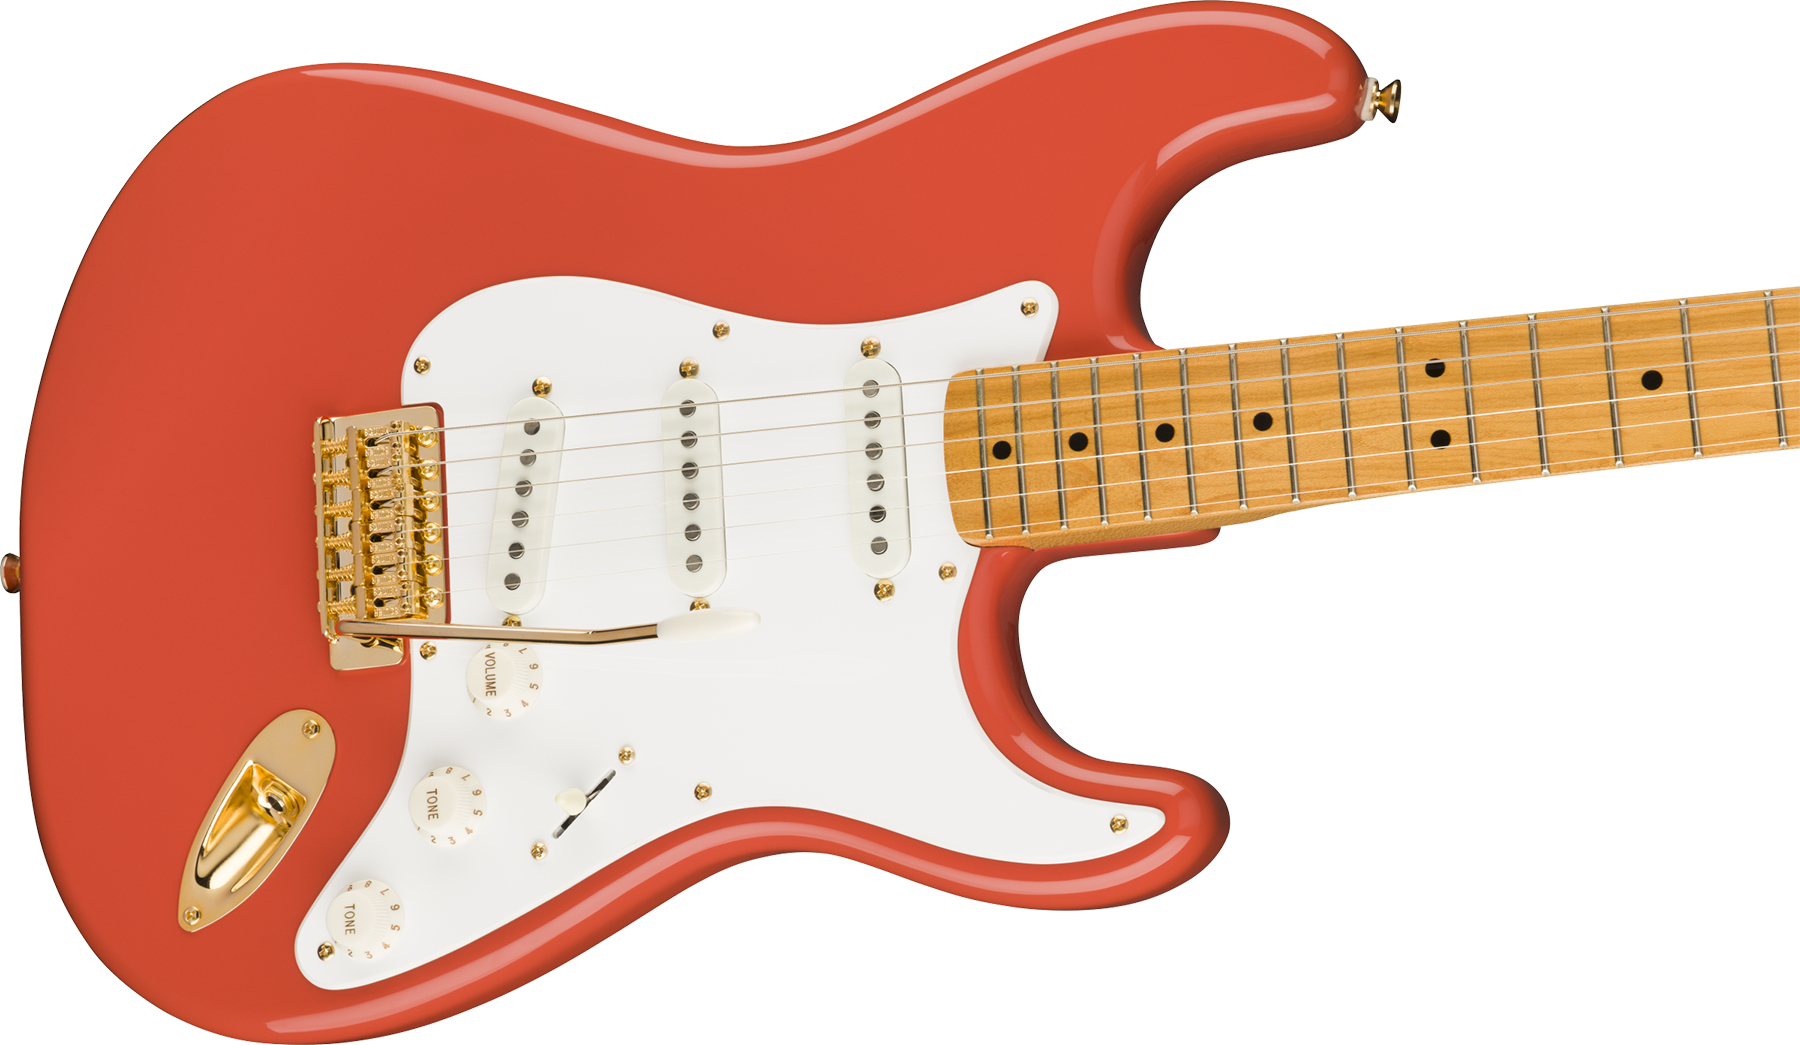 Squier Strat Classic Vibe '50s Fsr Ltd Mn - Fiesta Red With Gold Hardware - Guitare Électrique Forme Str - Variation 2